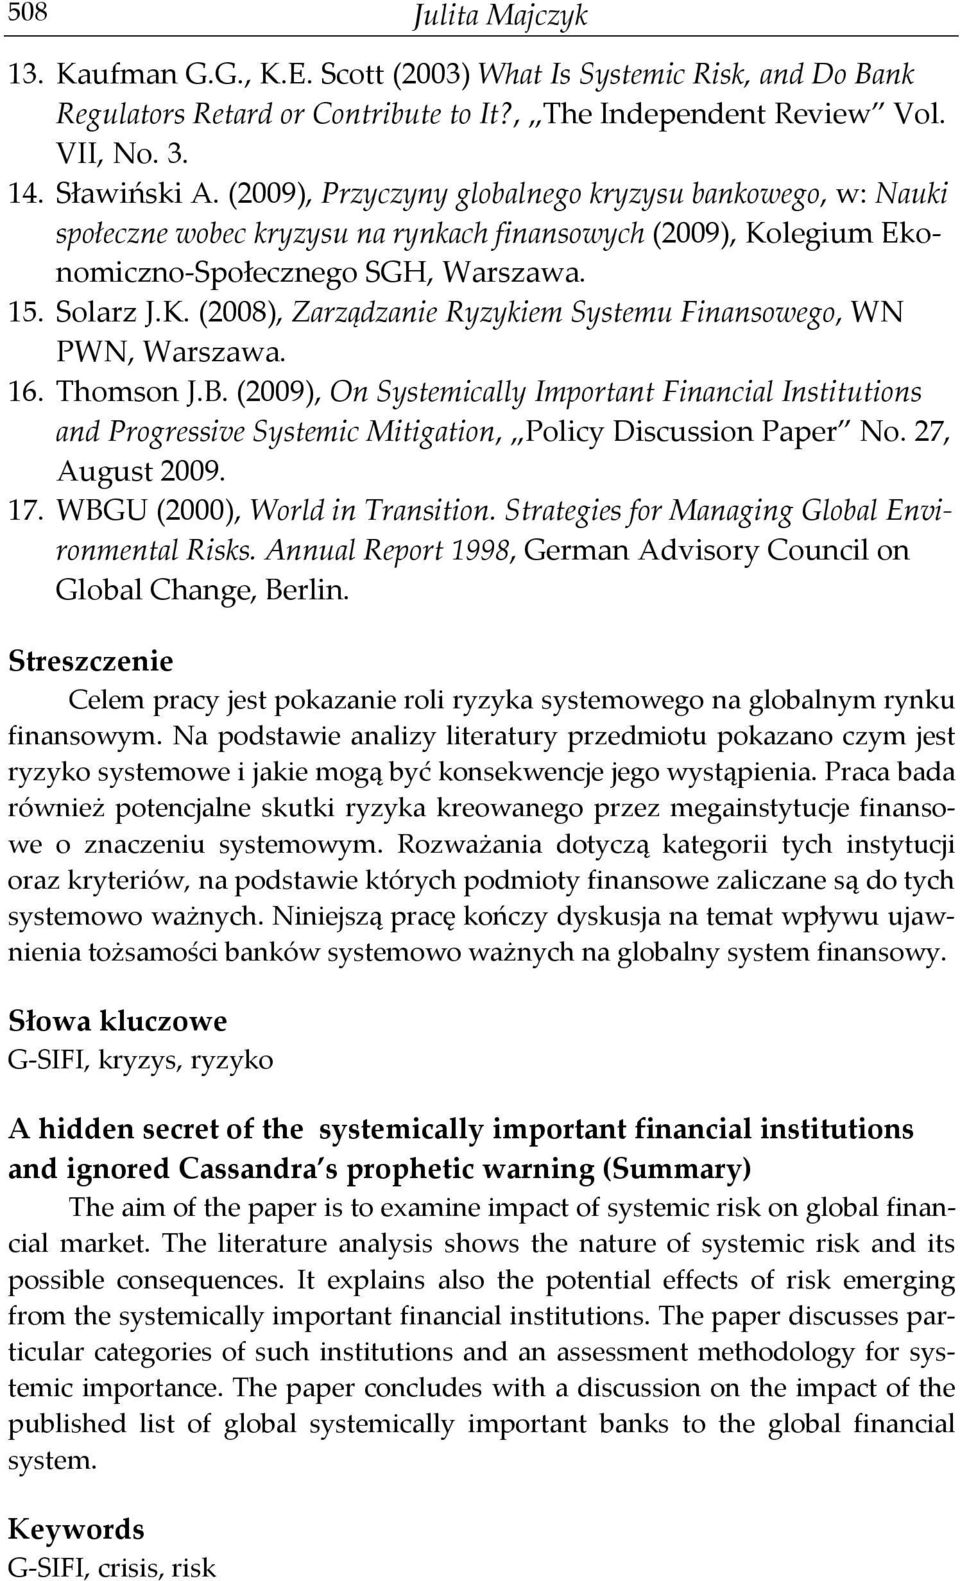 16. Thomson J.B. (2009), On Systemically Important Financial Institutions and Progressive Systemic Mitigation, Policy Discussion Paper No. 27, August 2009. 17. WBGU (2000), World in Transition.